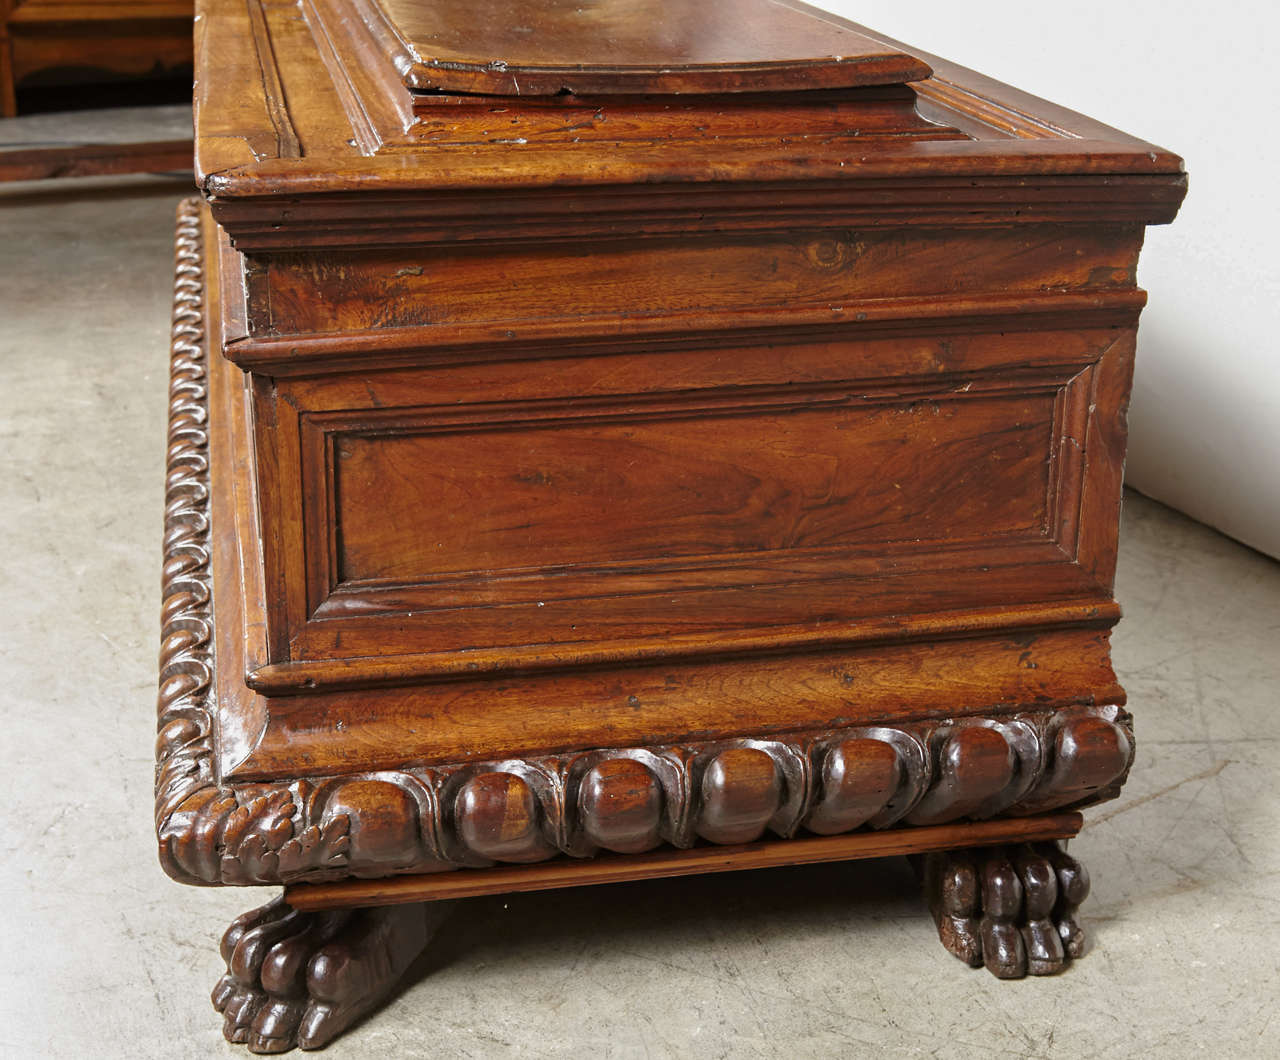 Carved Antique Italian Walnut Wood Cassone from the 1600s